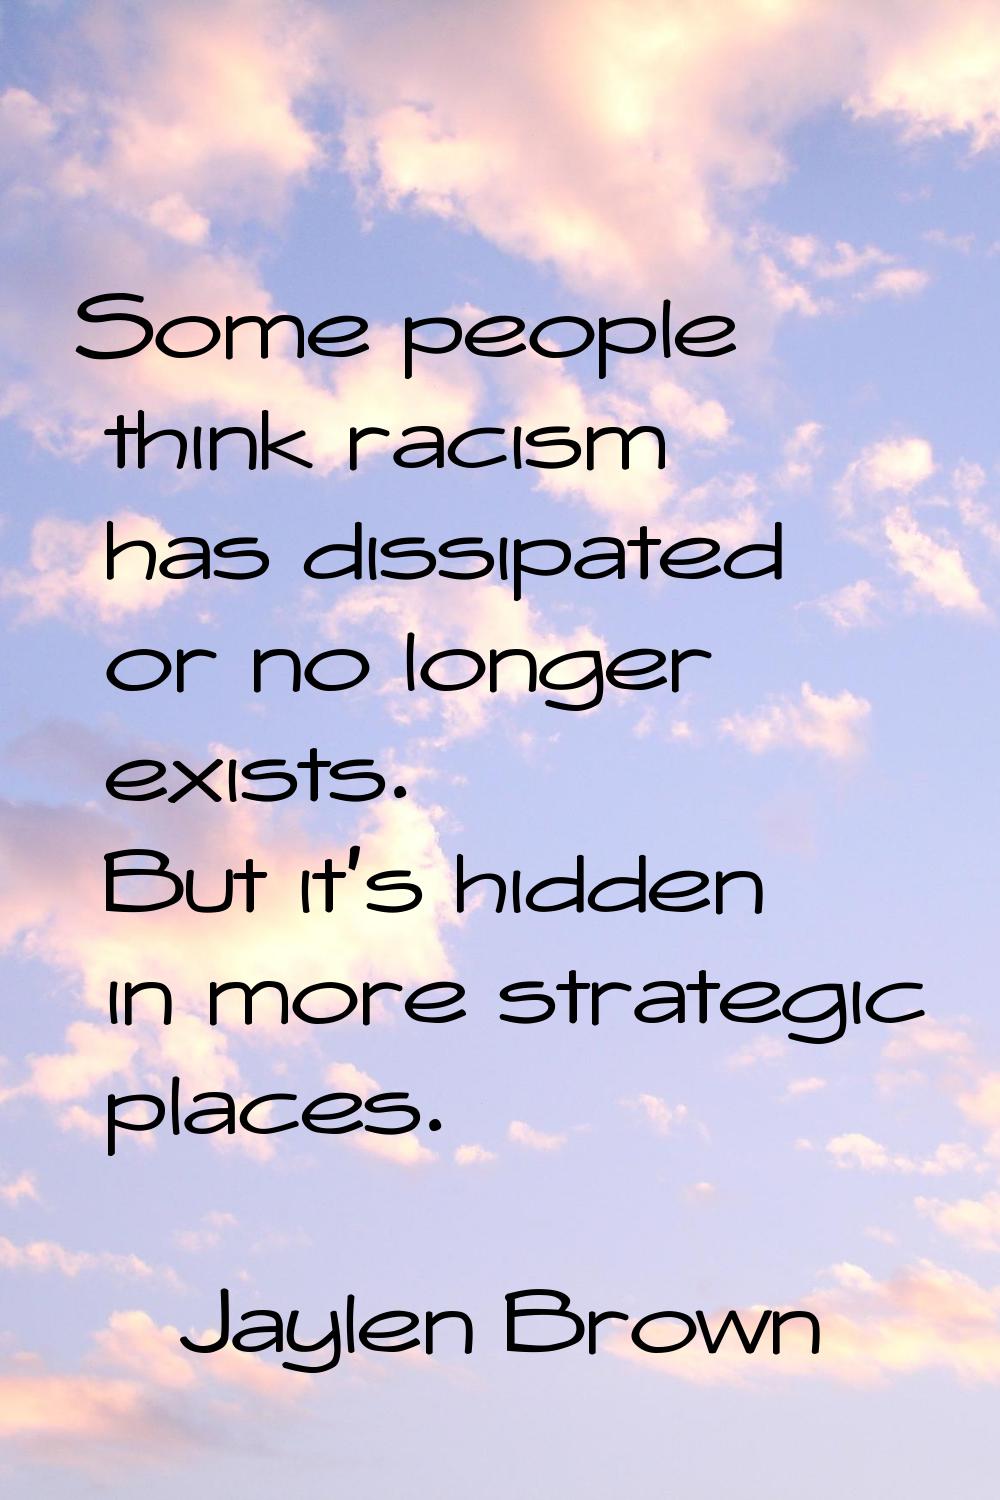 Some people think racism has dissipated or no longer exists. But it's hidden in more strategic plac